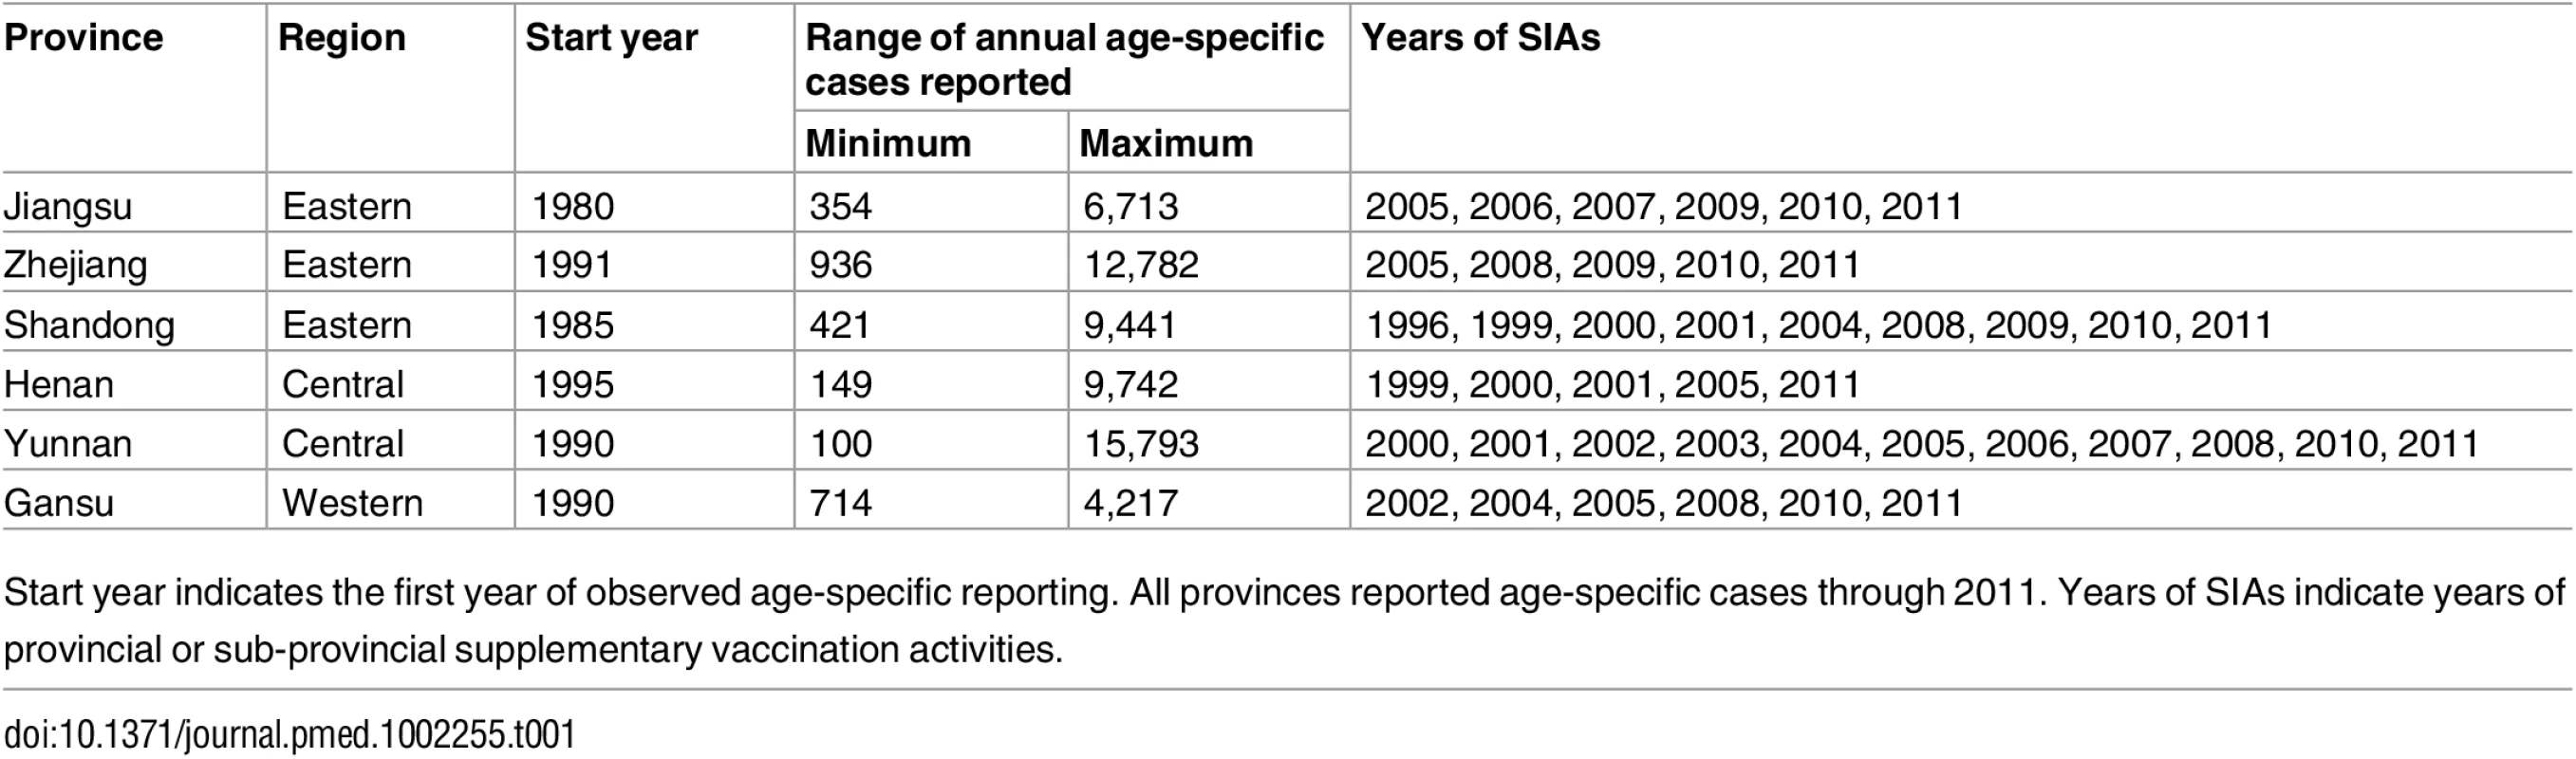 Description of age-specific case reporting in six Chinese provinces.